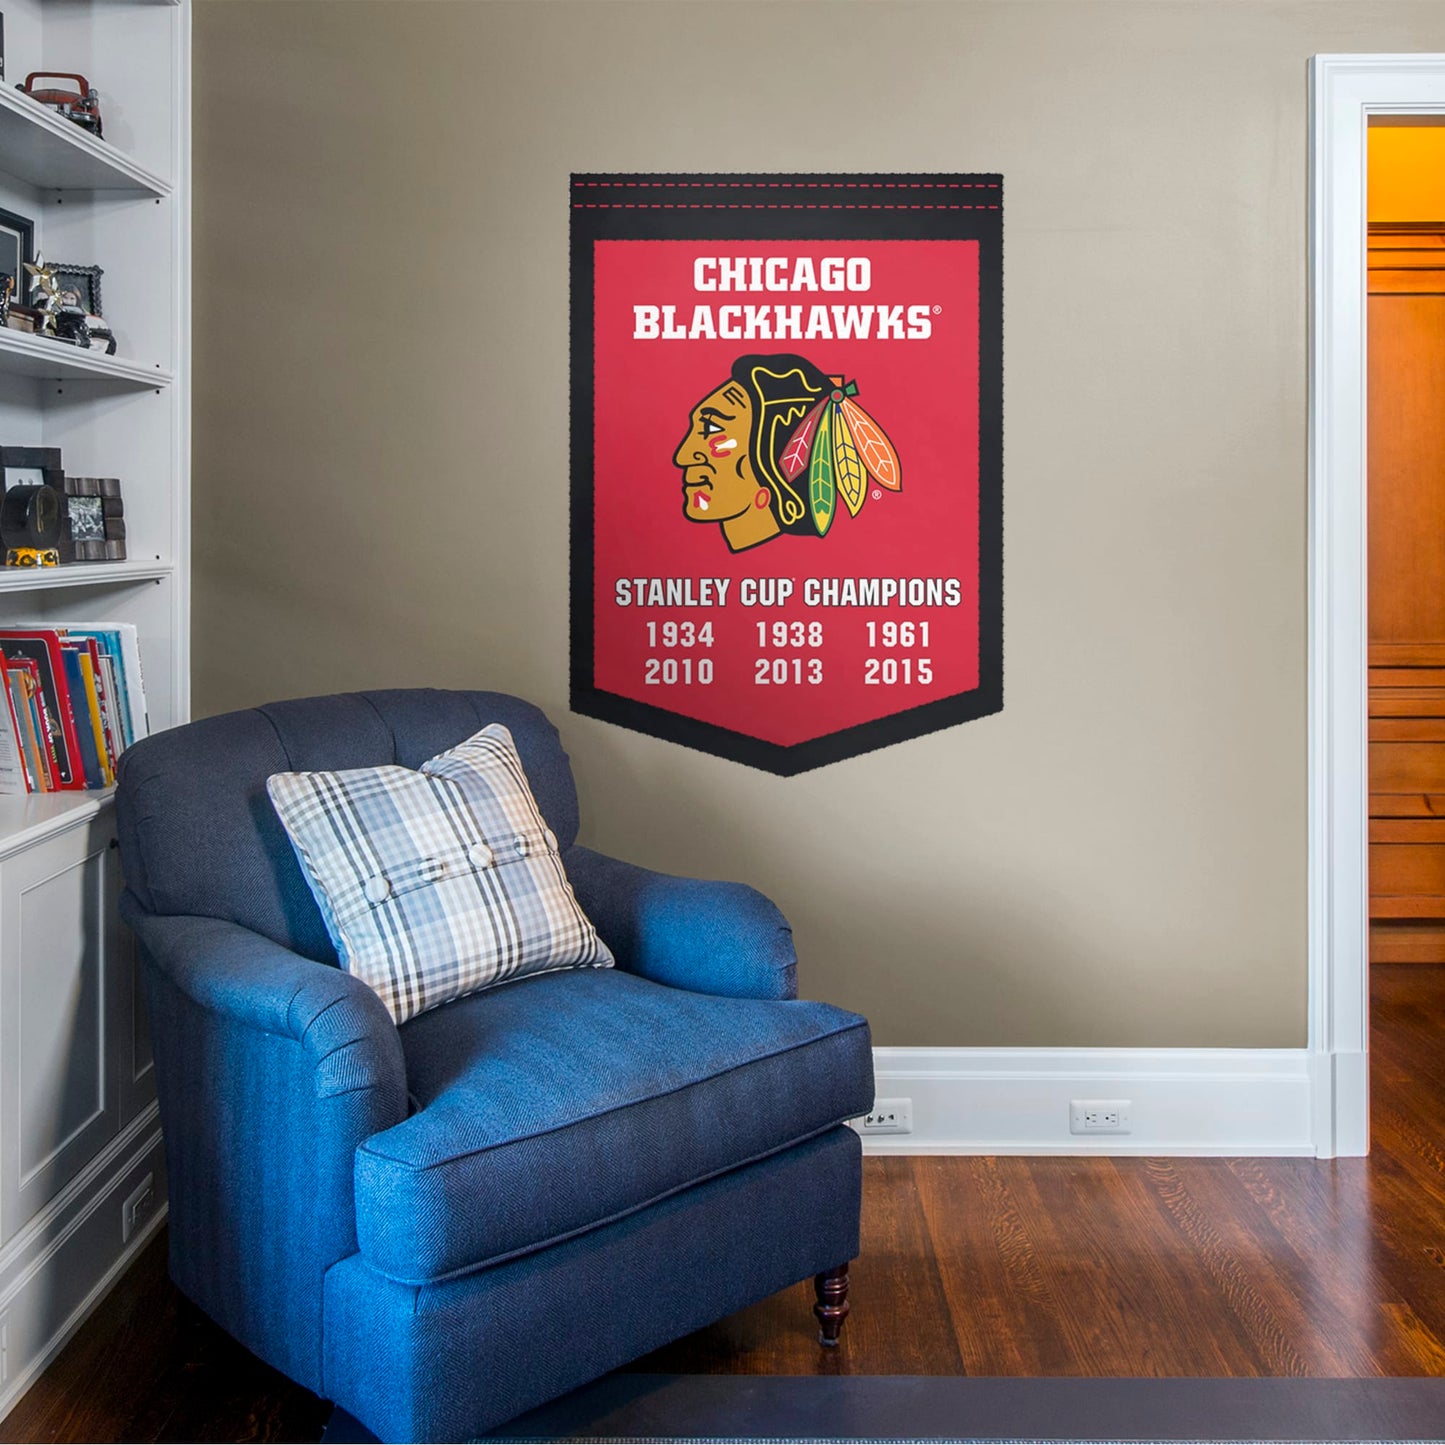 Chicago Blackhawks: Stanley Cup Champs Banner  - Officially Licensed NHL Removable Wall Decal